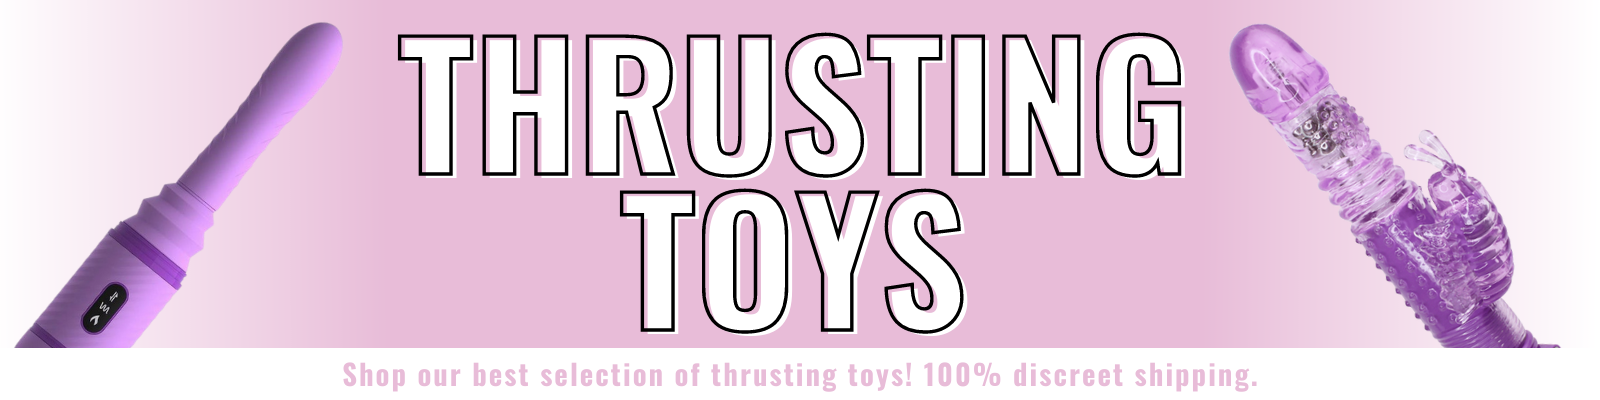 Thrusting Toys Banner. Banner says: Trusting Toys. Shop our best selection of thrusting toys. 100% discreet shipping.